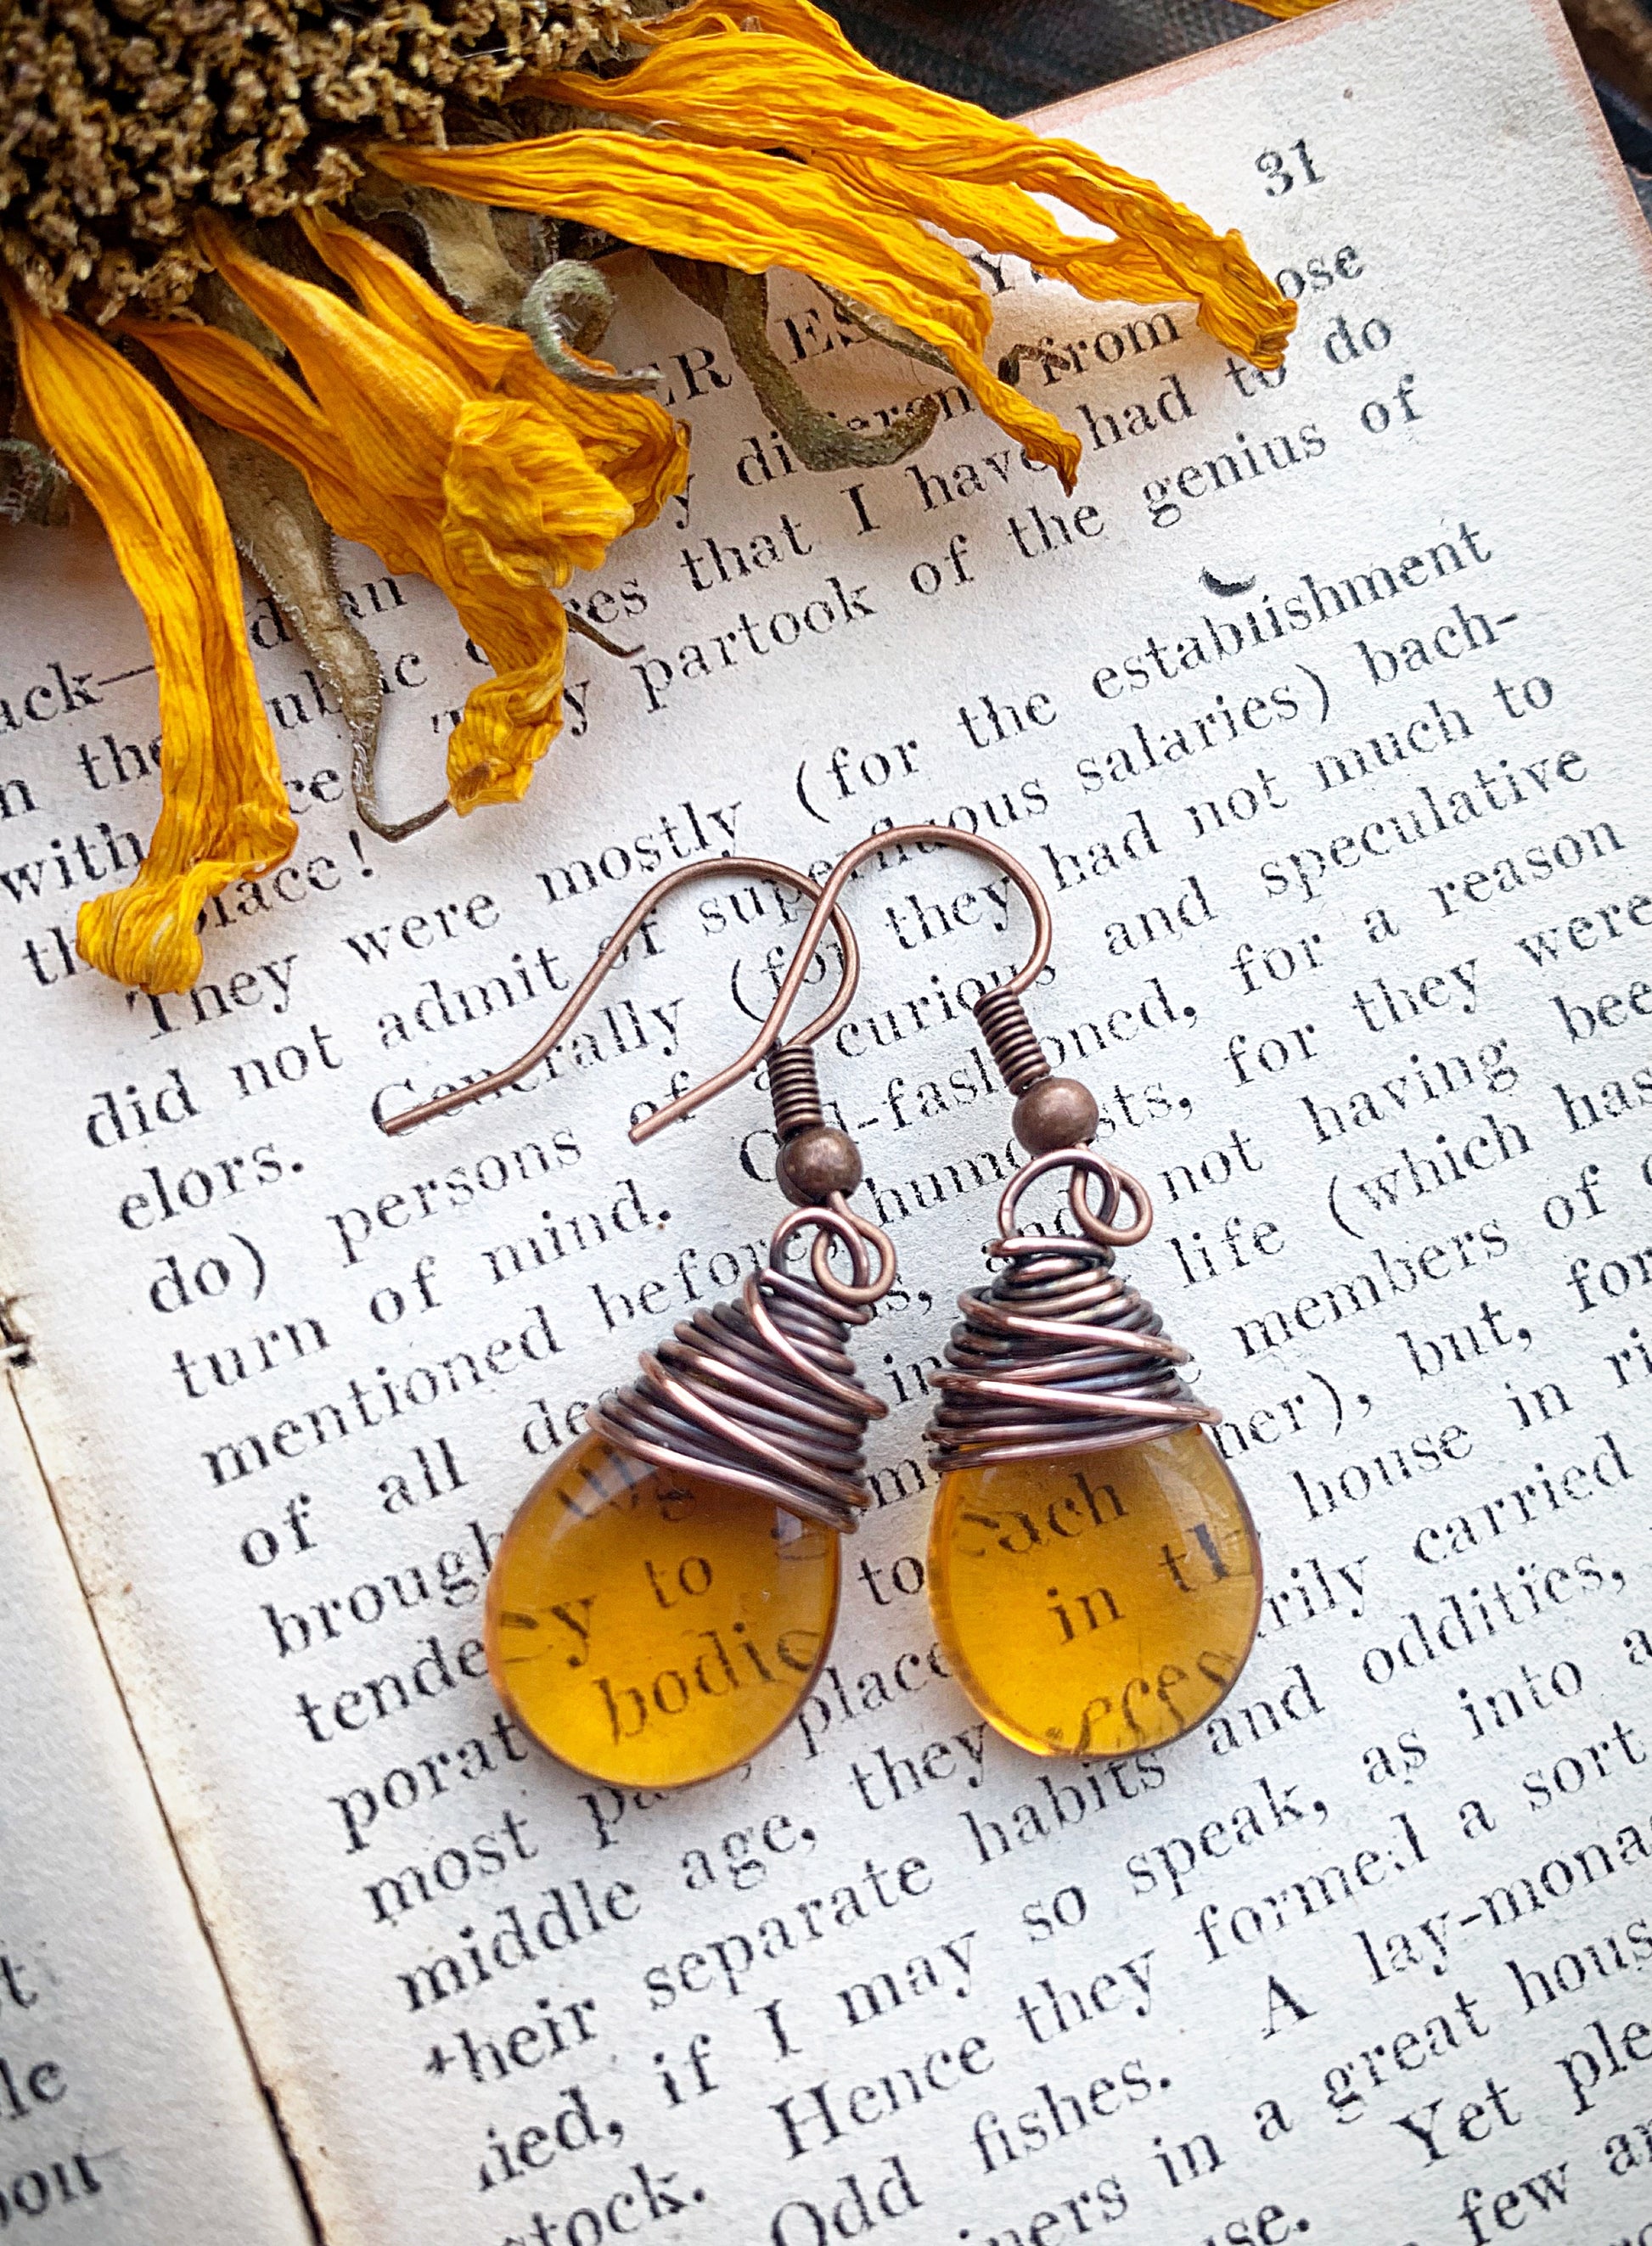 Amber teardrop Czech glass and copper wire wrapped earrings. - Andria Bieber Designs 